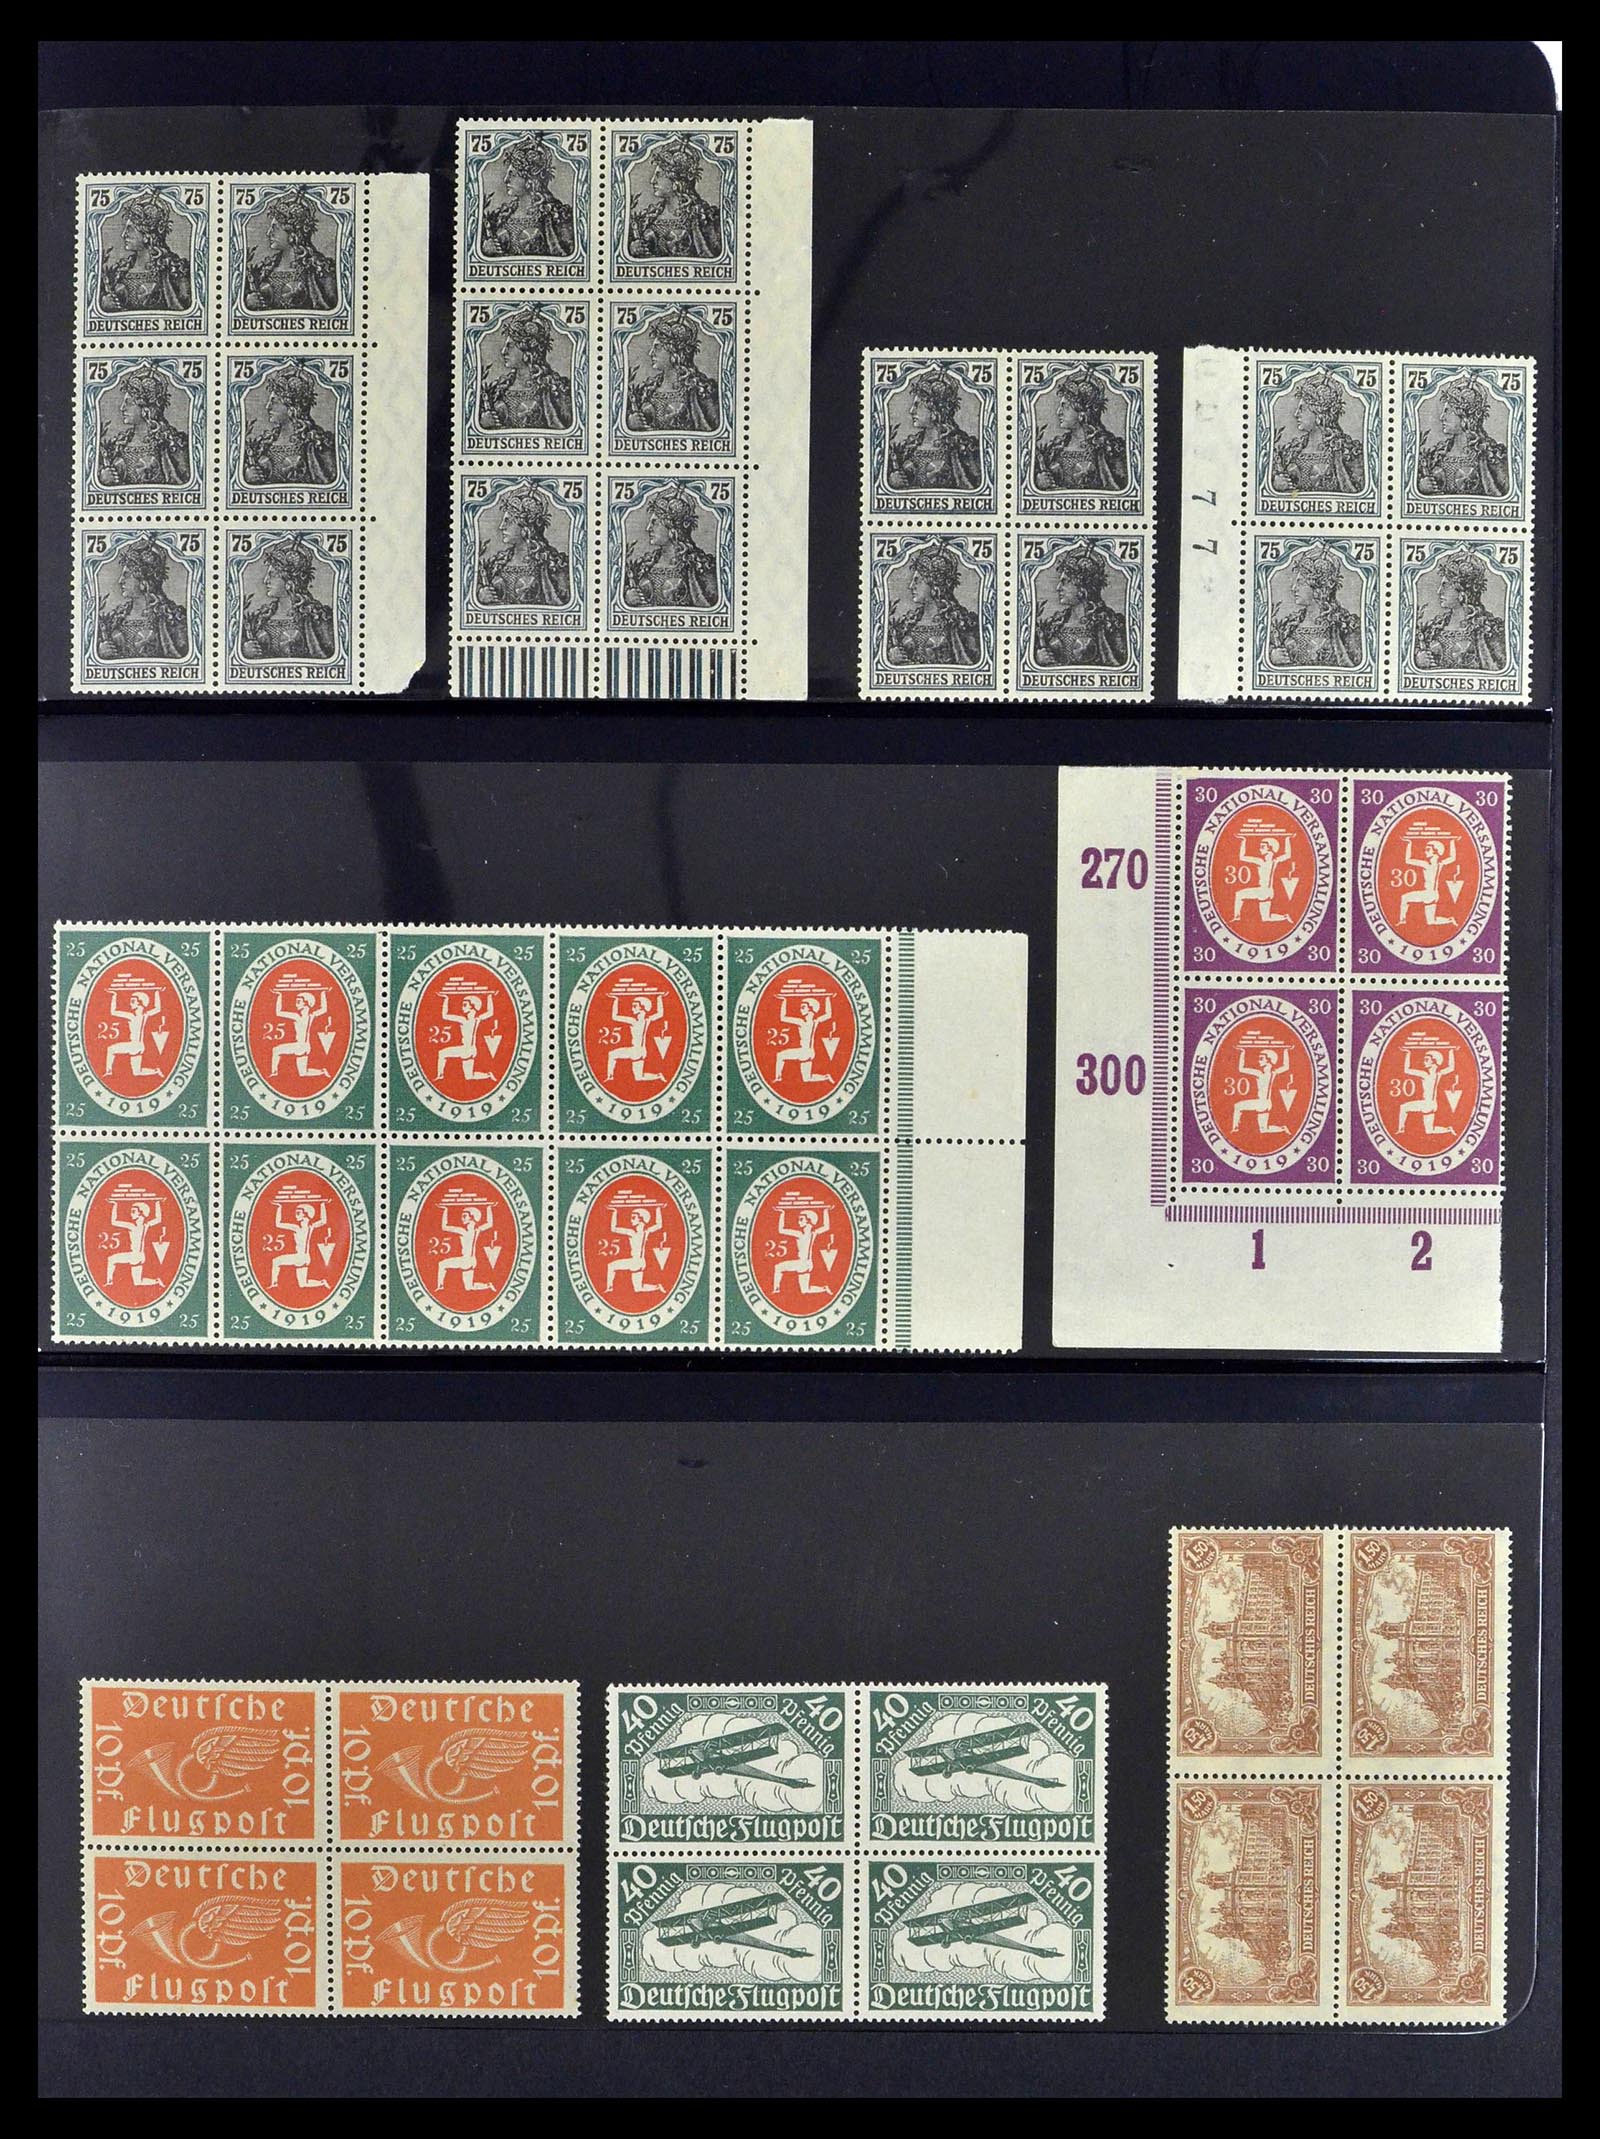 39255 0005 - Stamp collection 39255 German Reich MNH blocks of 4.